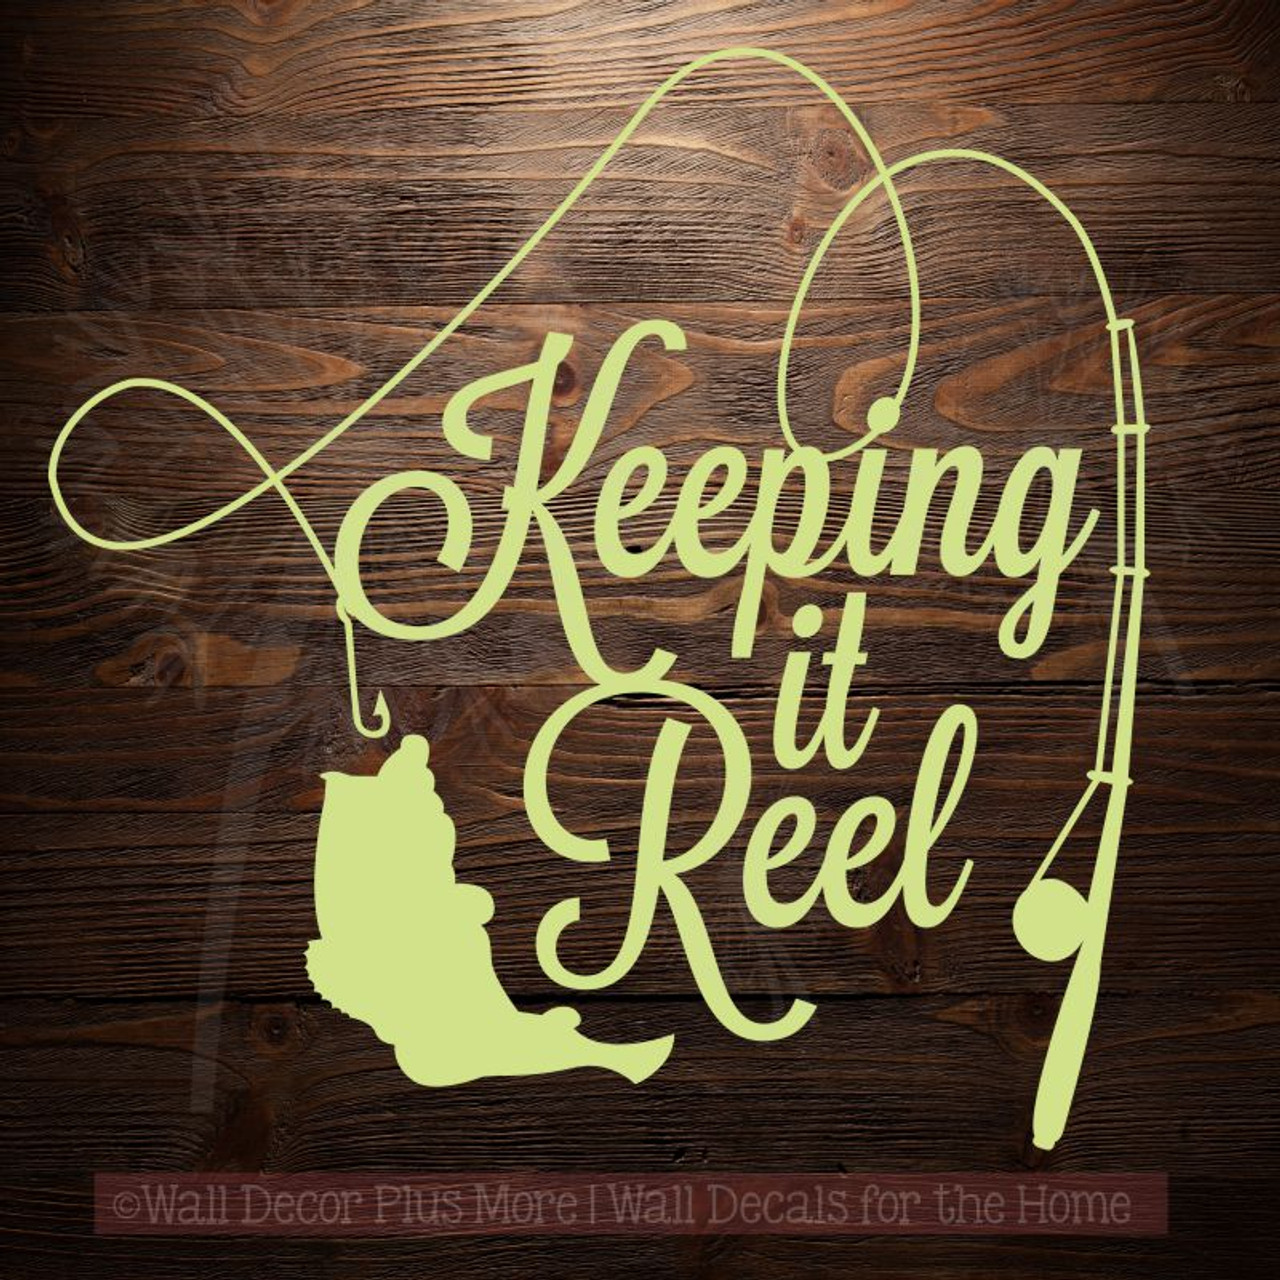 Keeping it Reel Fishing Pole and Fish on Line Wall Art Decal Stickers